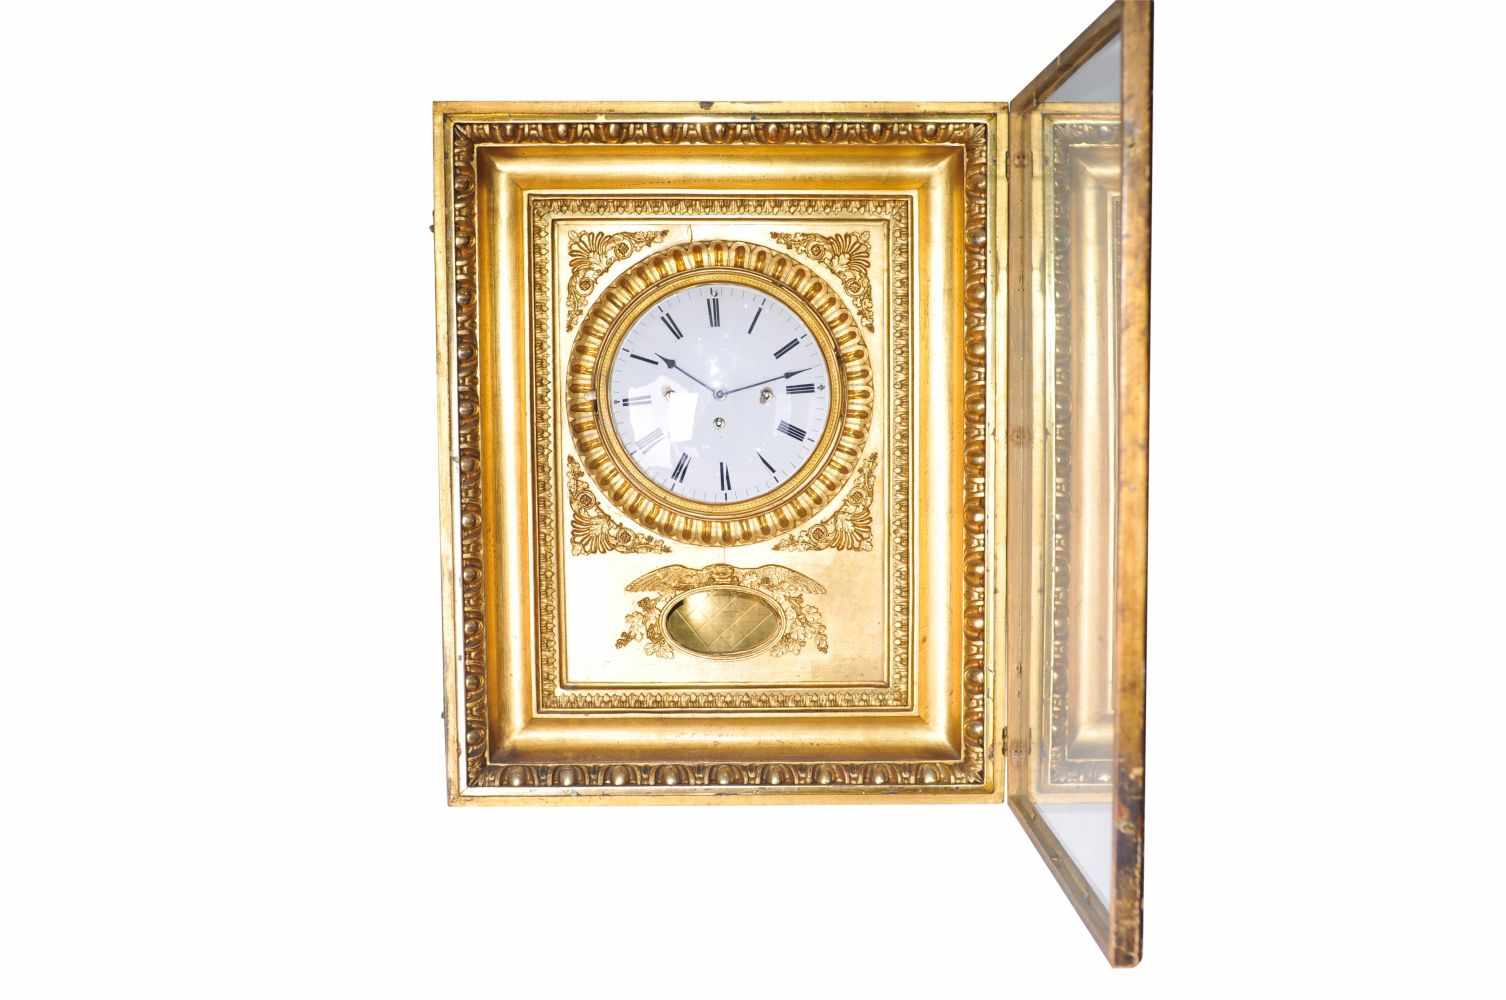 Viennese frame clockDecorative Viennese frame clock in gold-plated wooden frame with 4/4 striking - Image 2 of 5